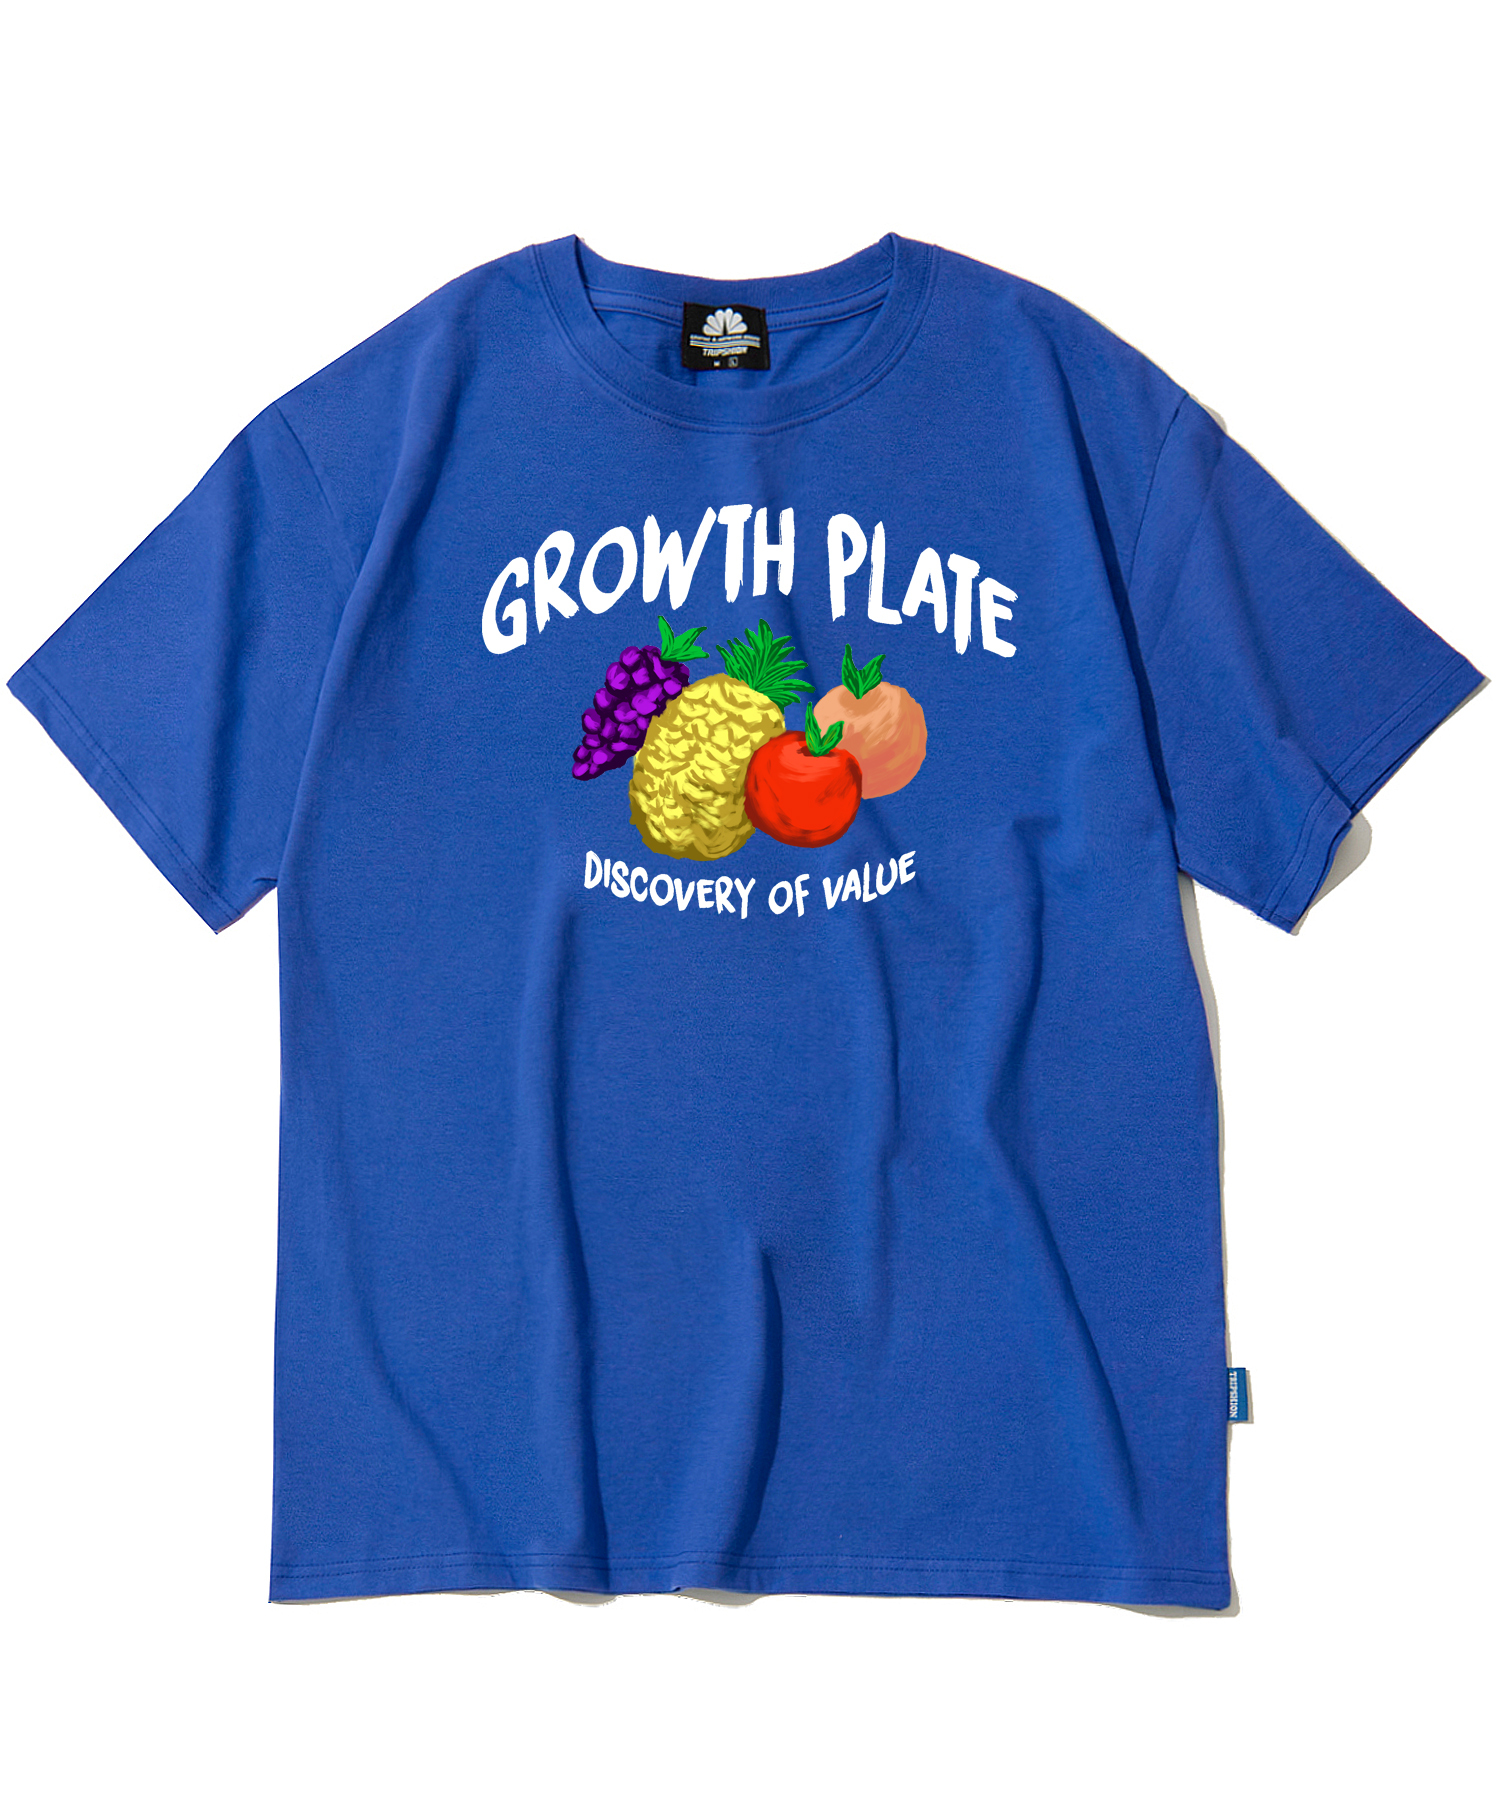 GROWTH PLATE FRUITS GRAPHIC T-SHIRTS - BLUE